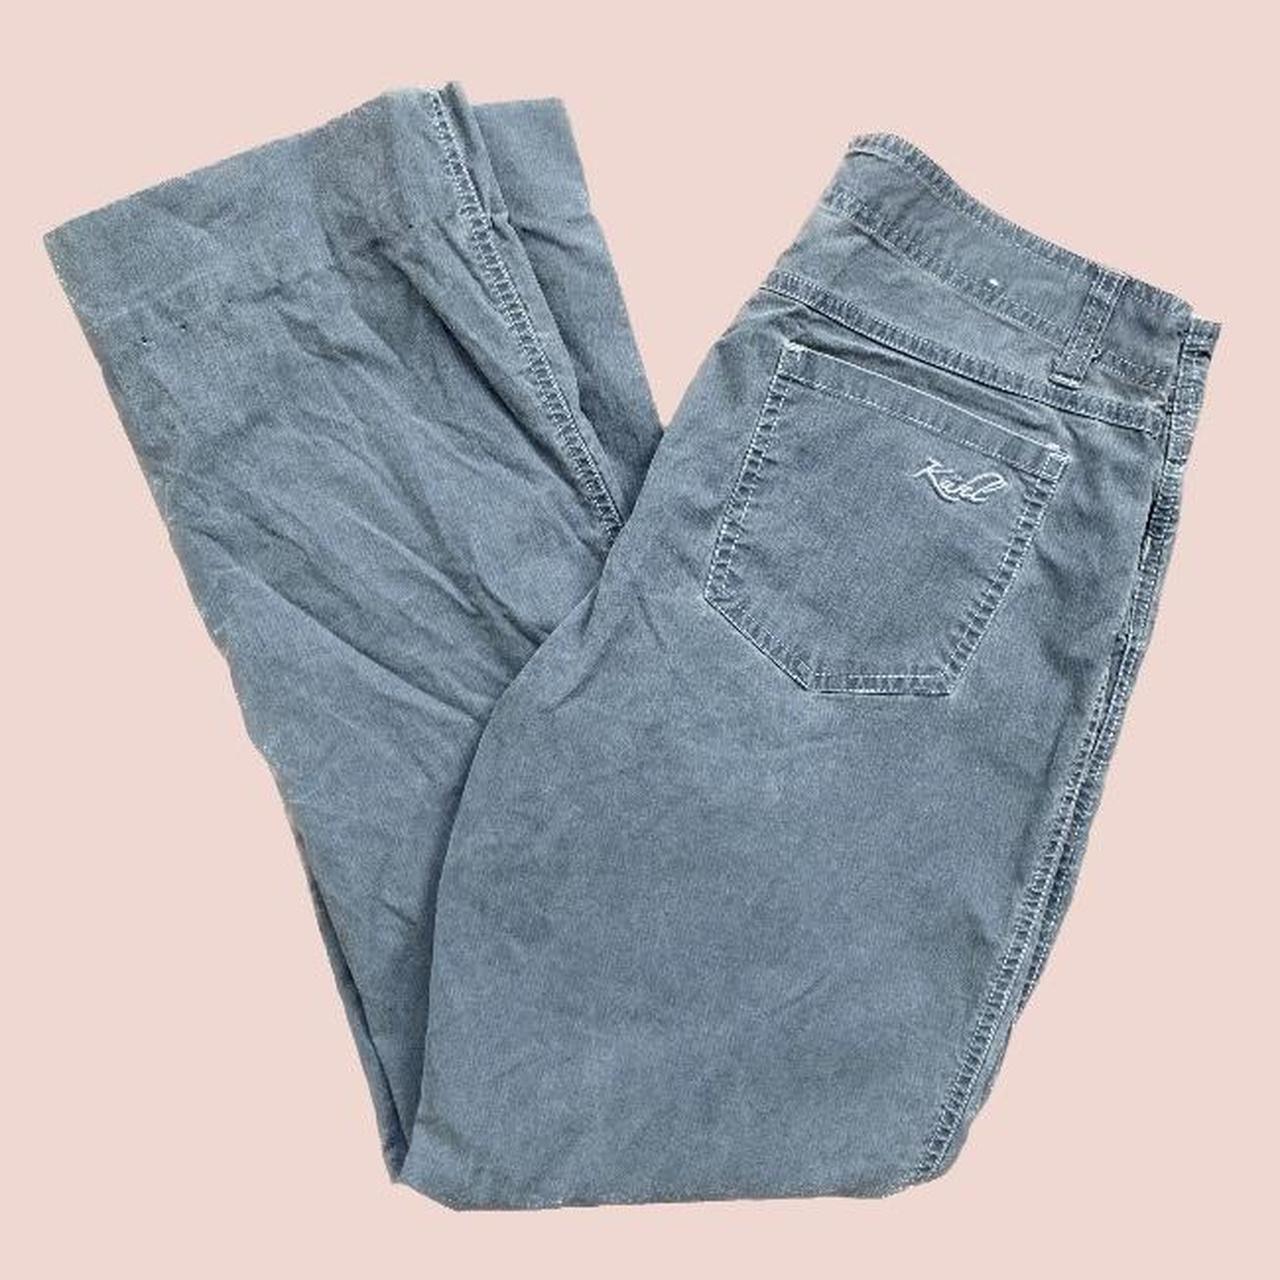 KÜHL Women's Grey and Blue Trousers